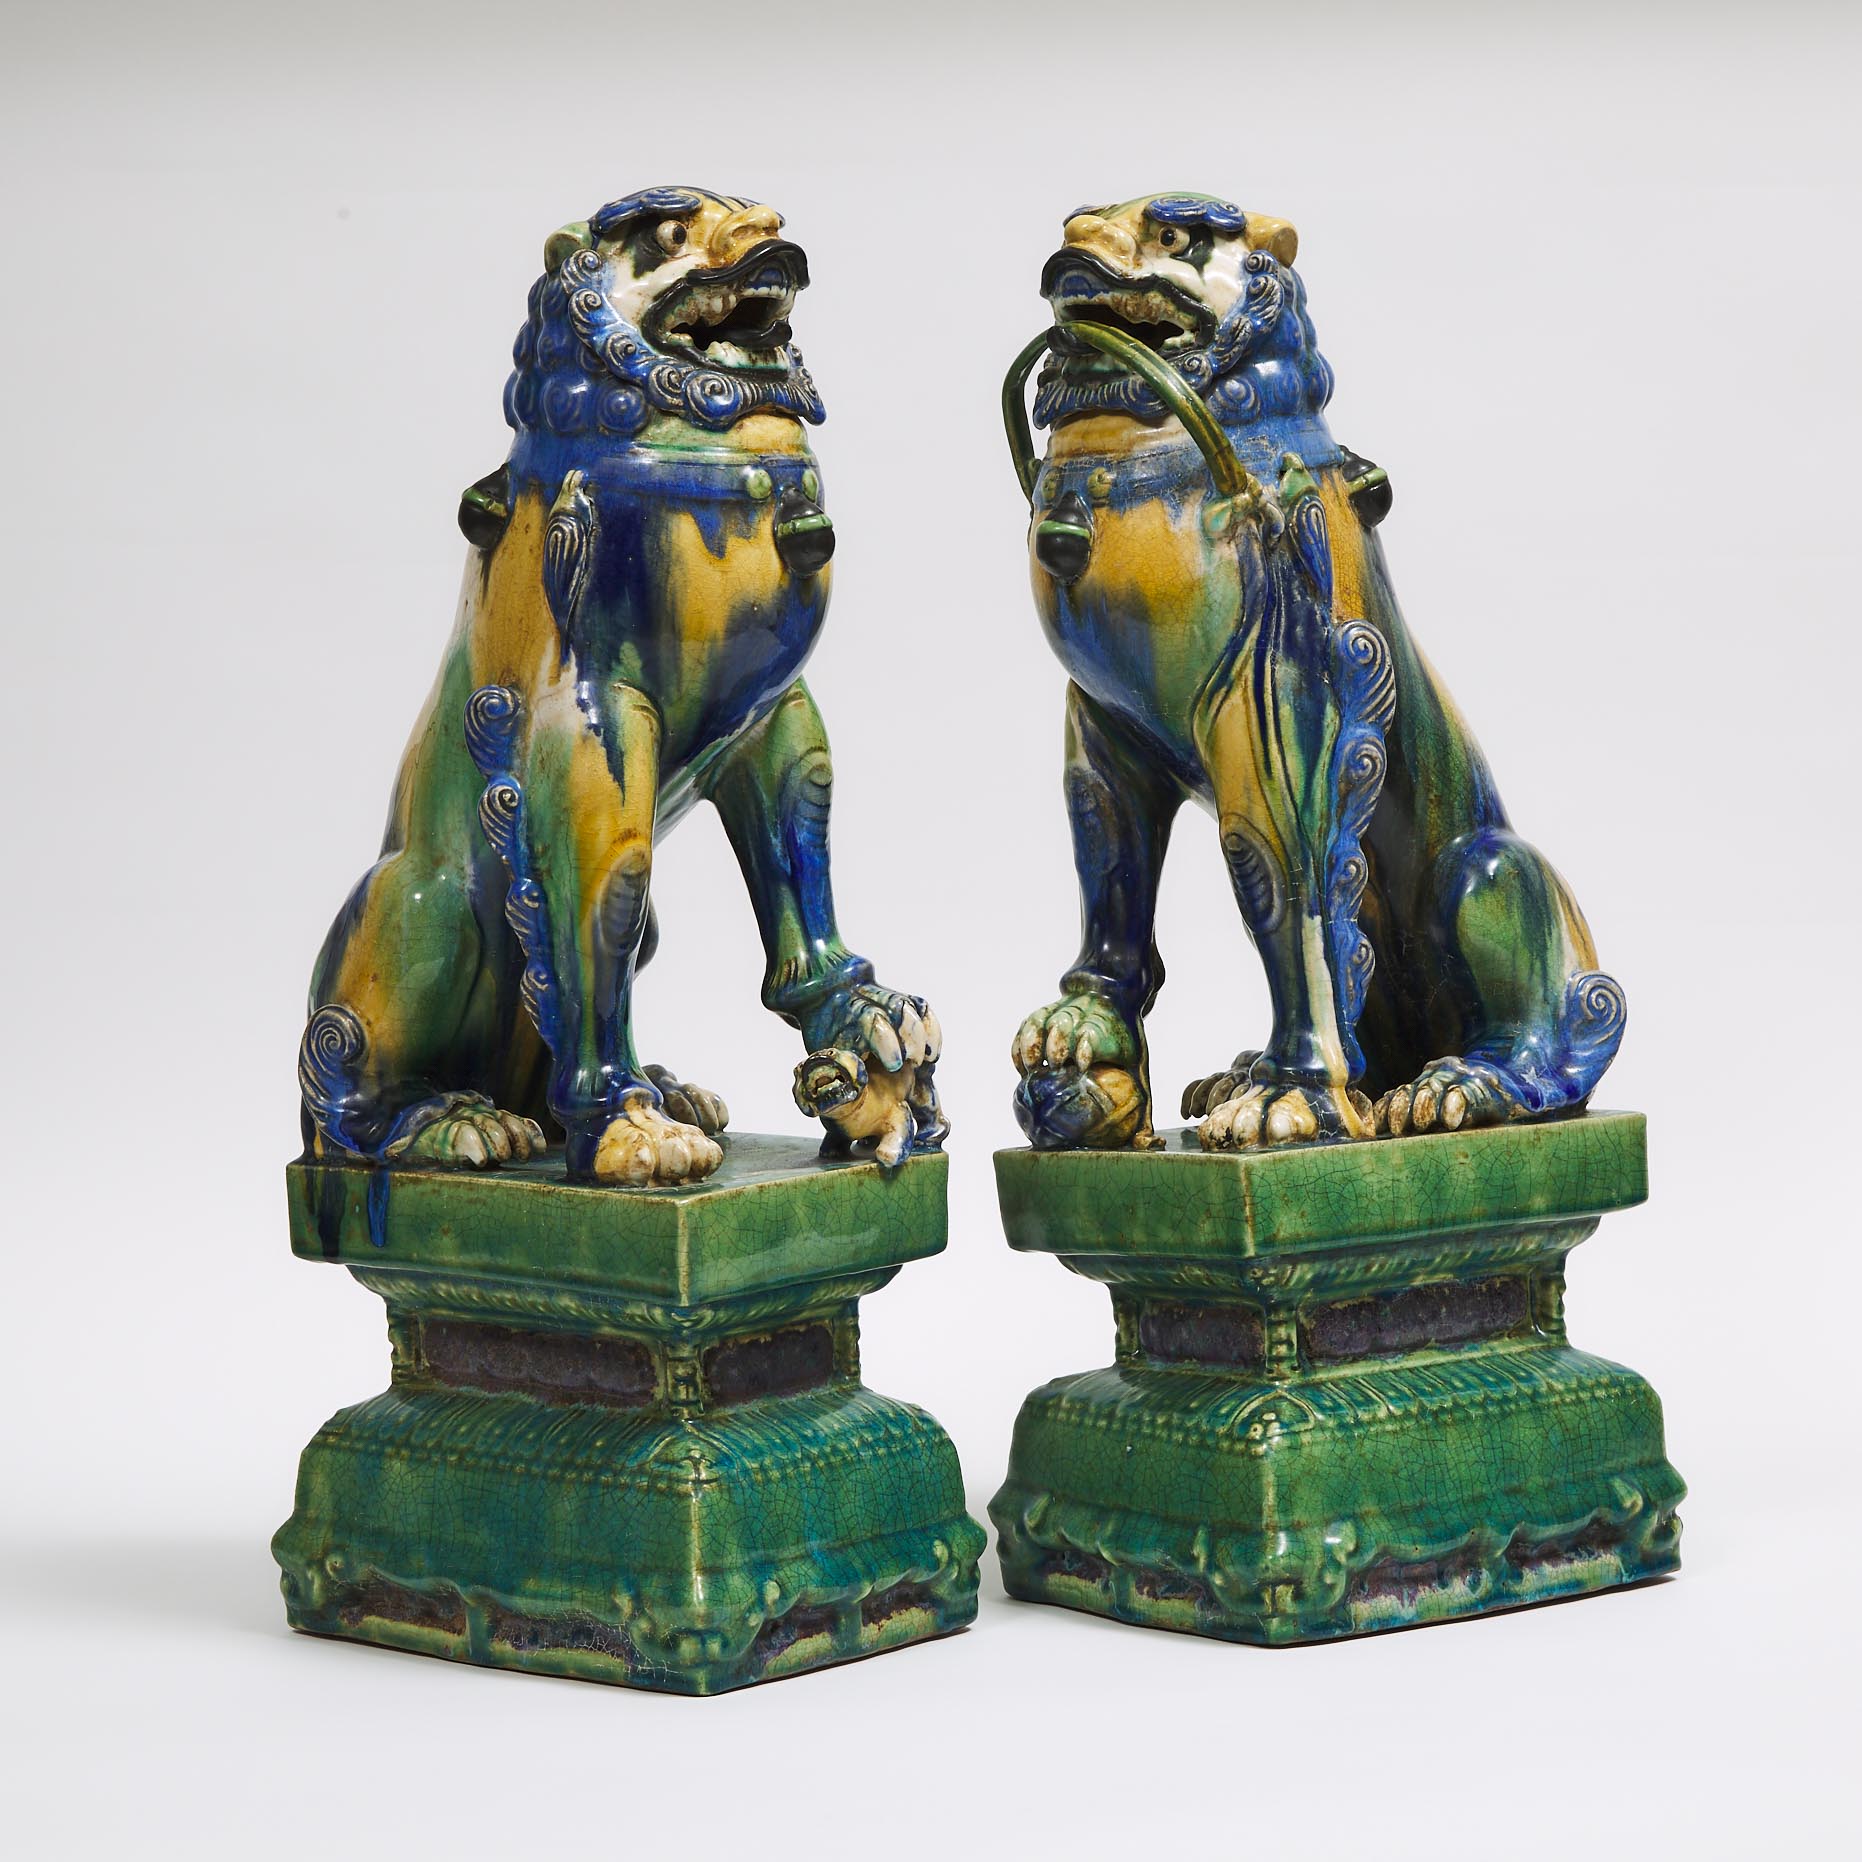 A Pair of Sancai-Glazed Buddhist Lions, 19th Century or Later